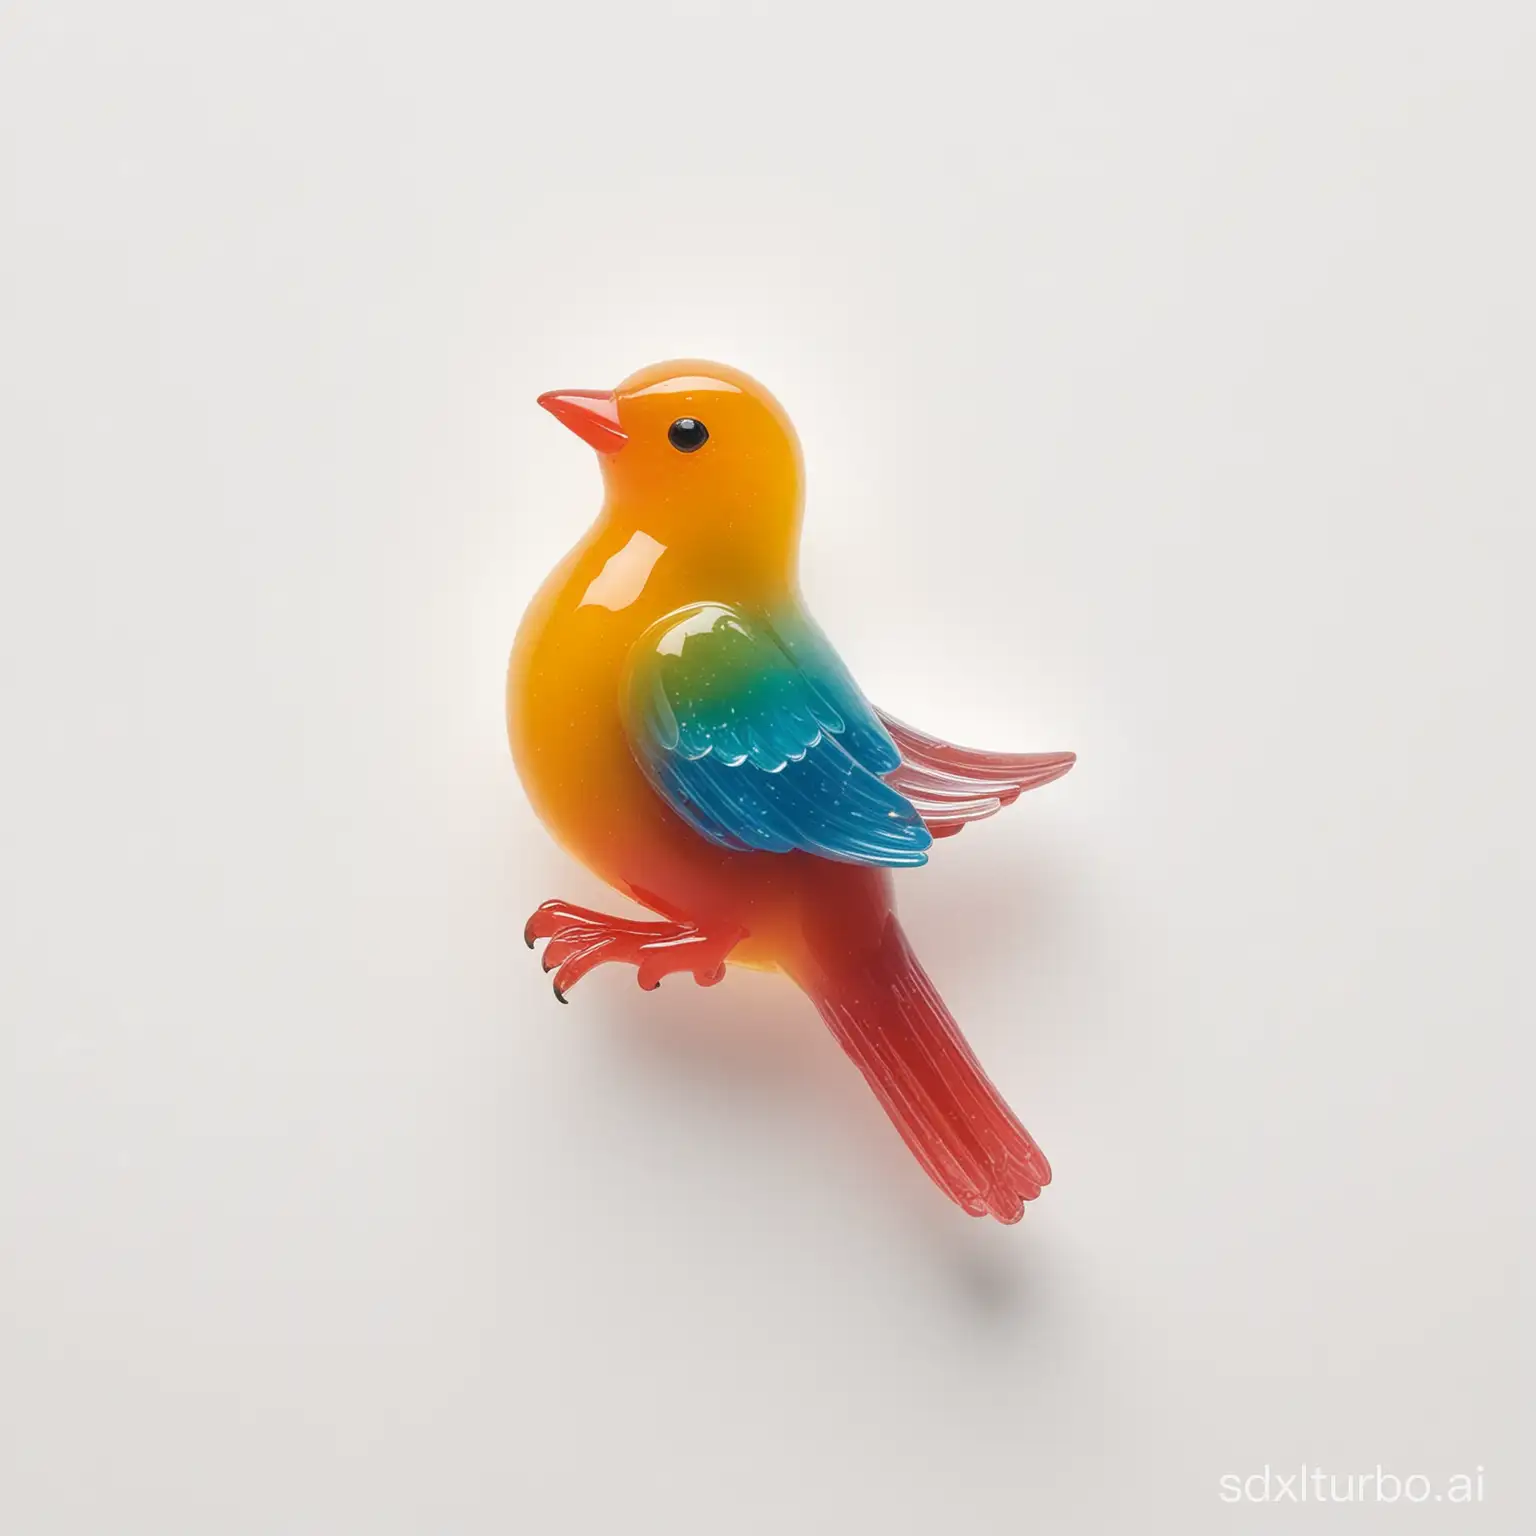 Vibrant-Gummy-Bird-Photography-Juicy-Colors-on-Pure-White-Background